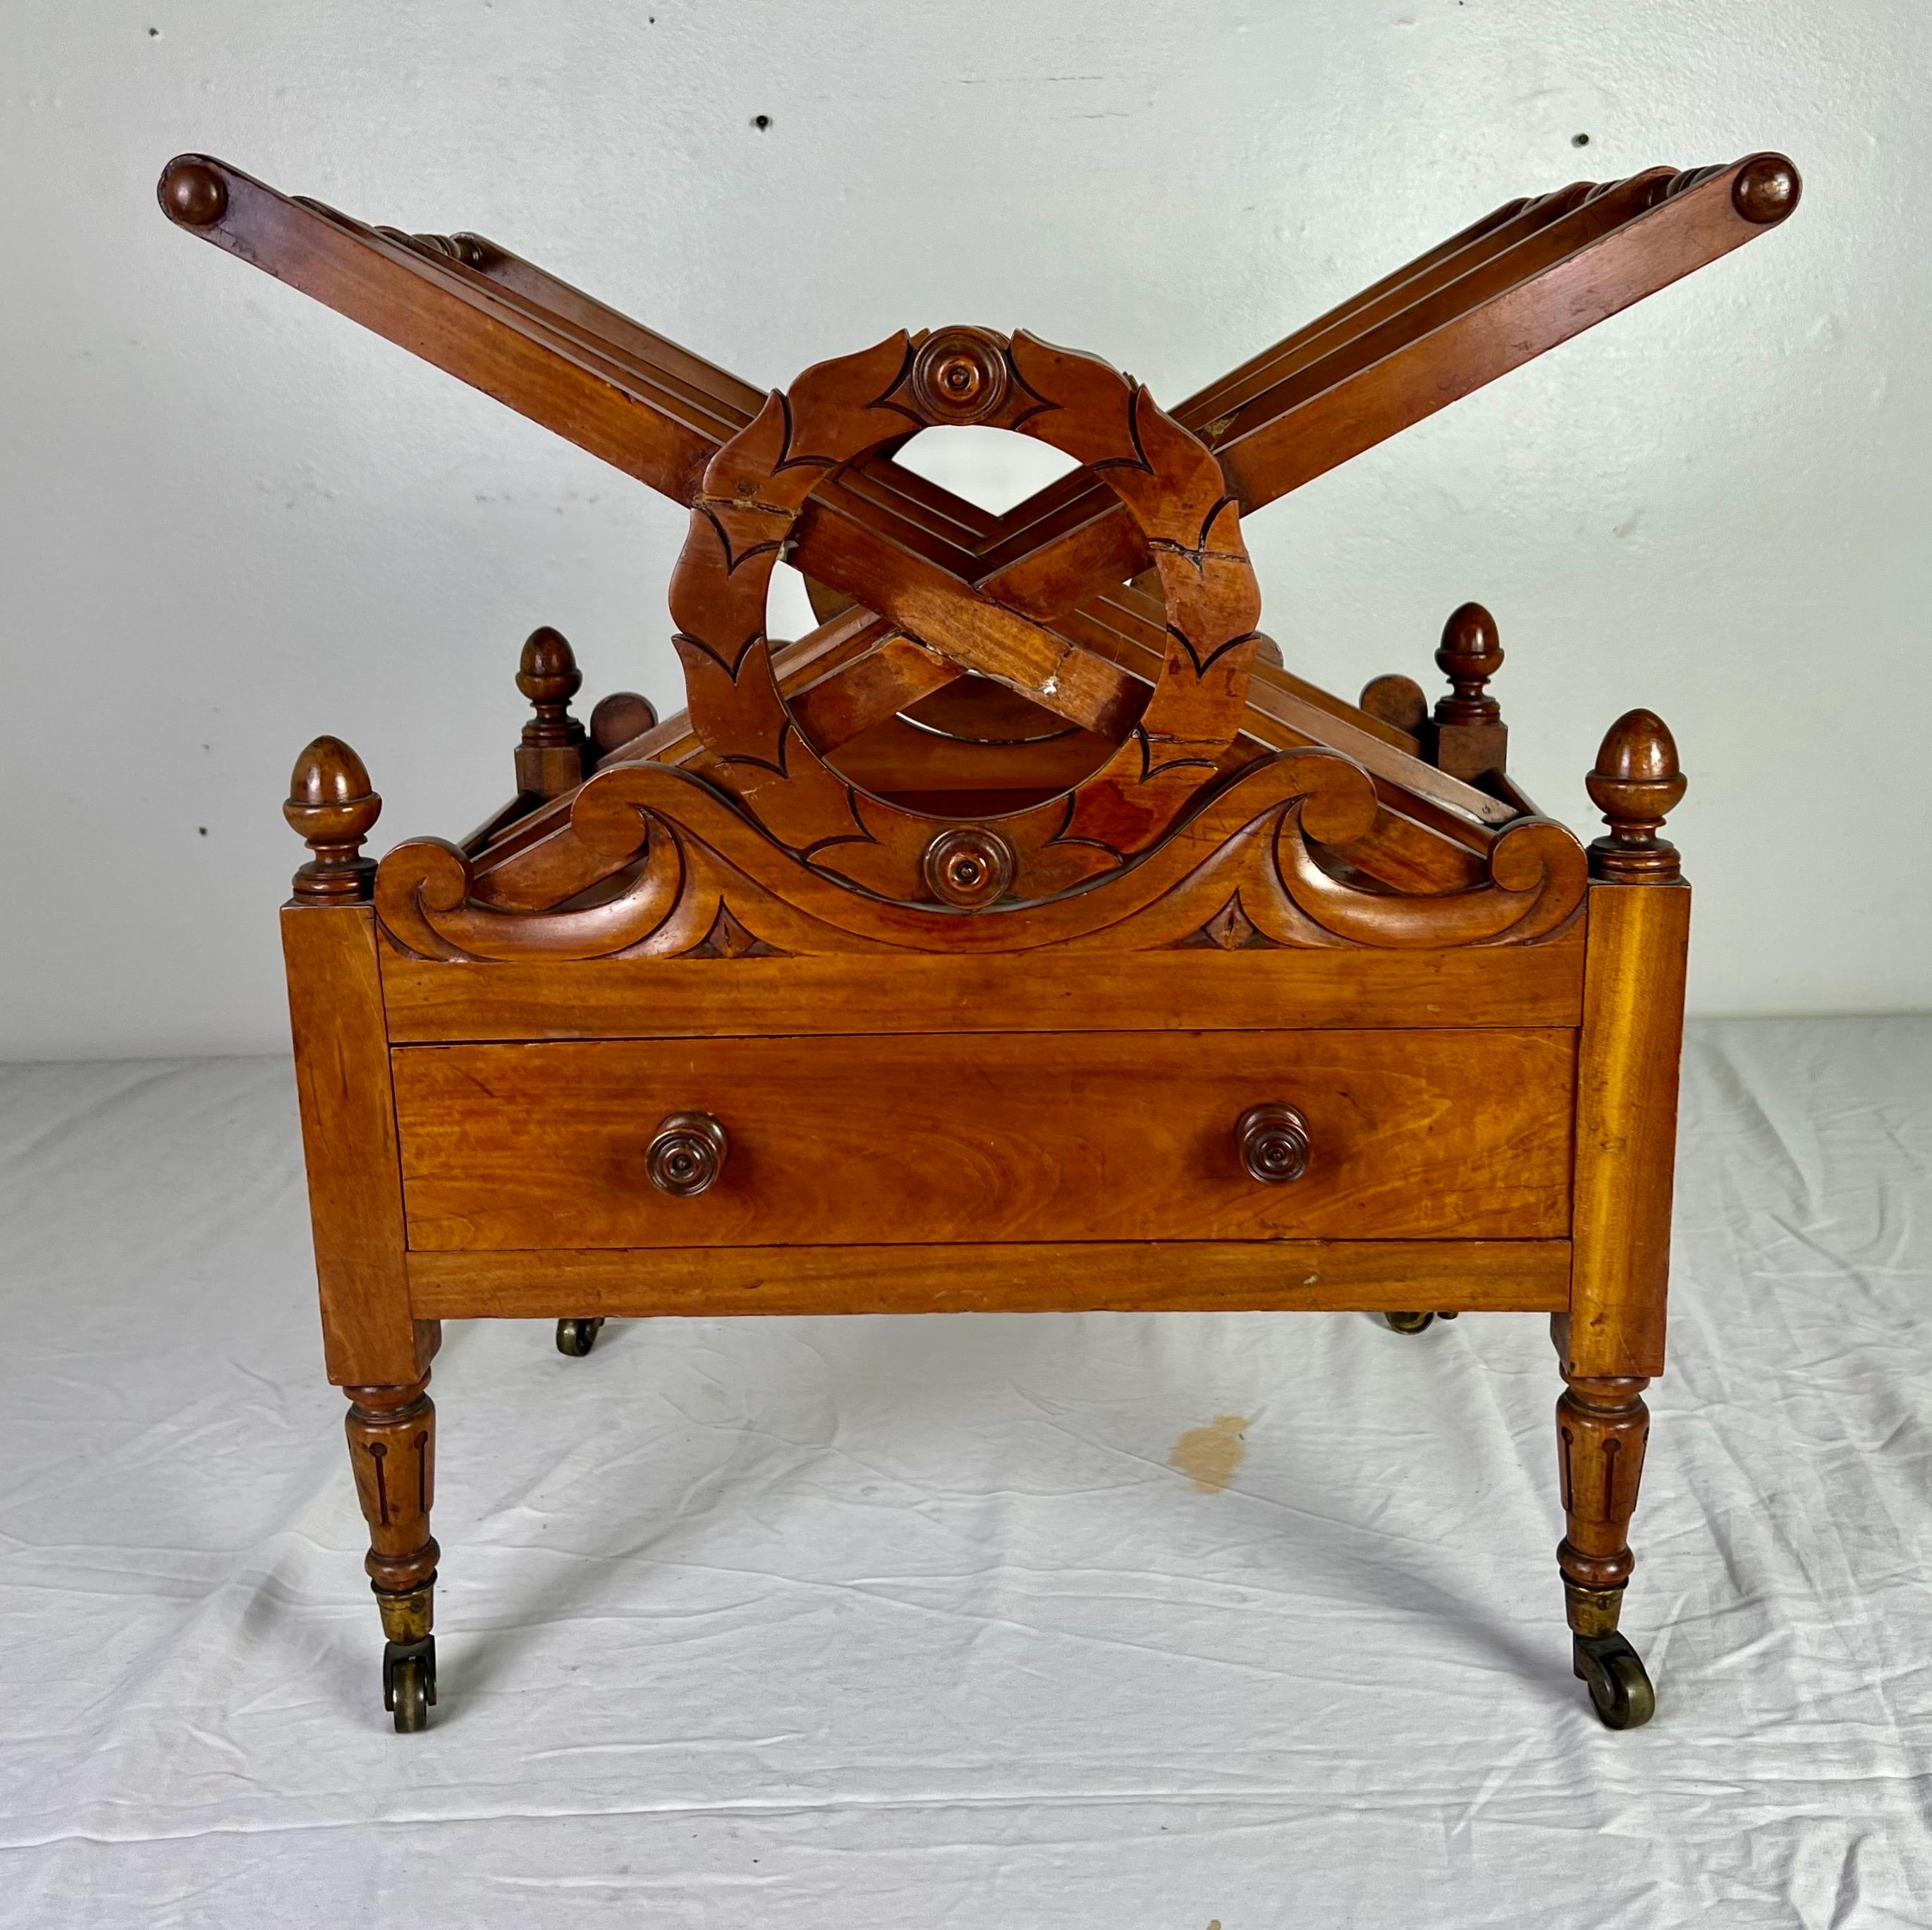 19th century English maple magazine rack with single drawer.  The magazine rack stands on four straight legs that have the original casters.